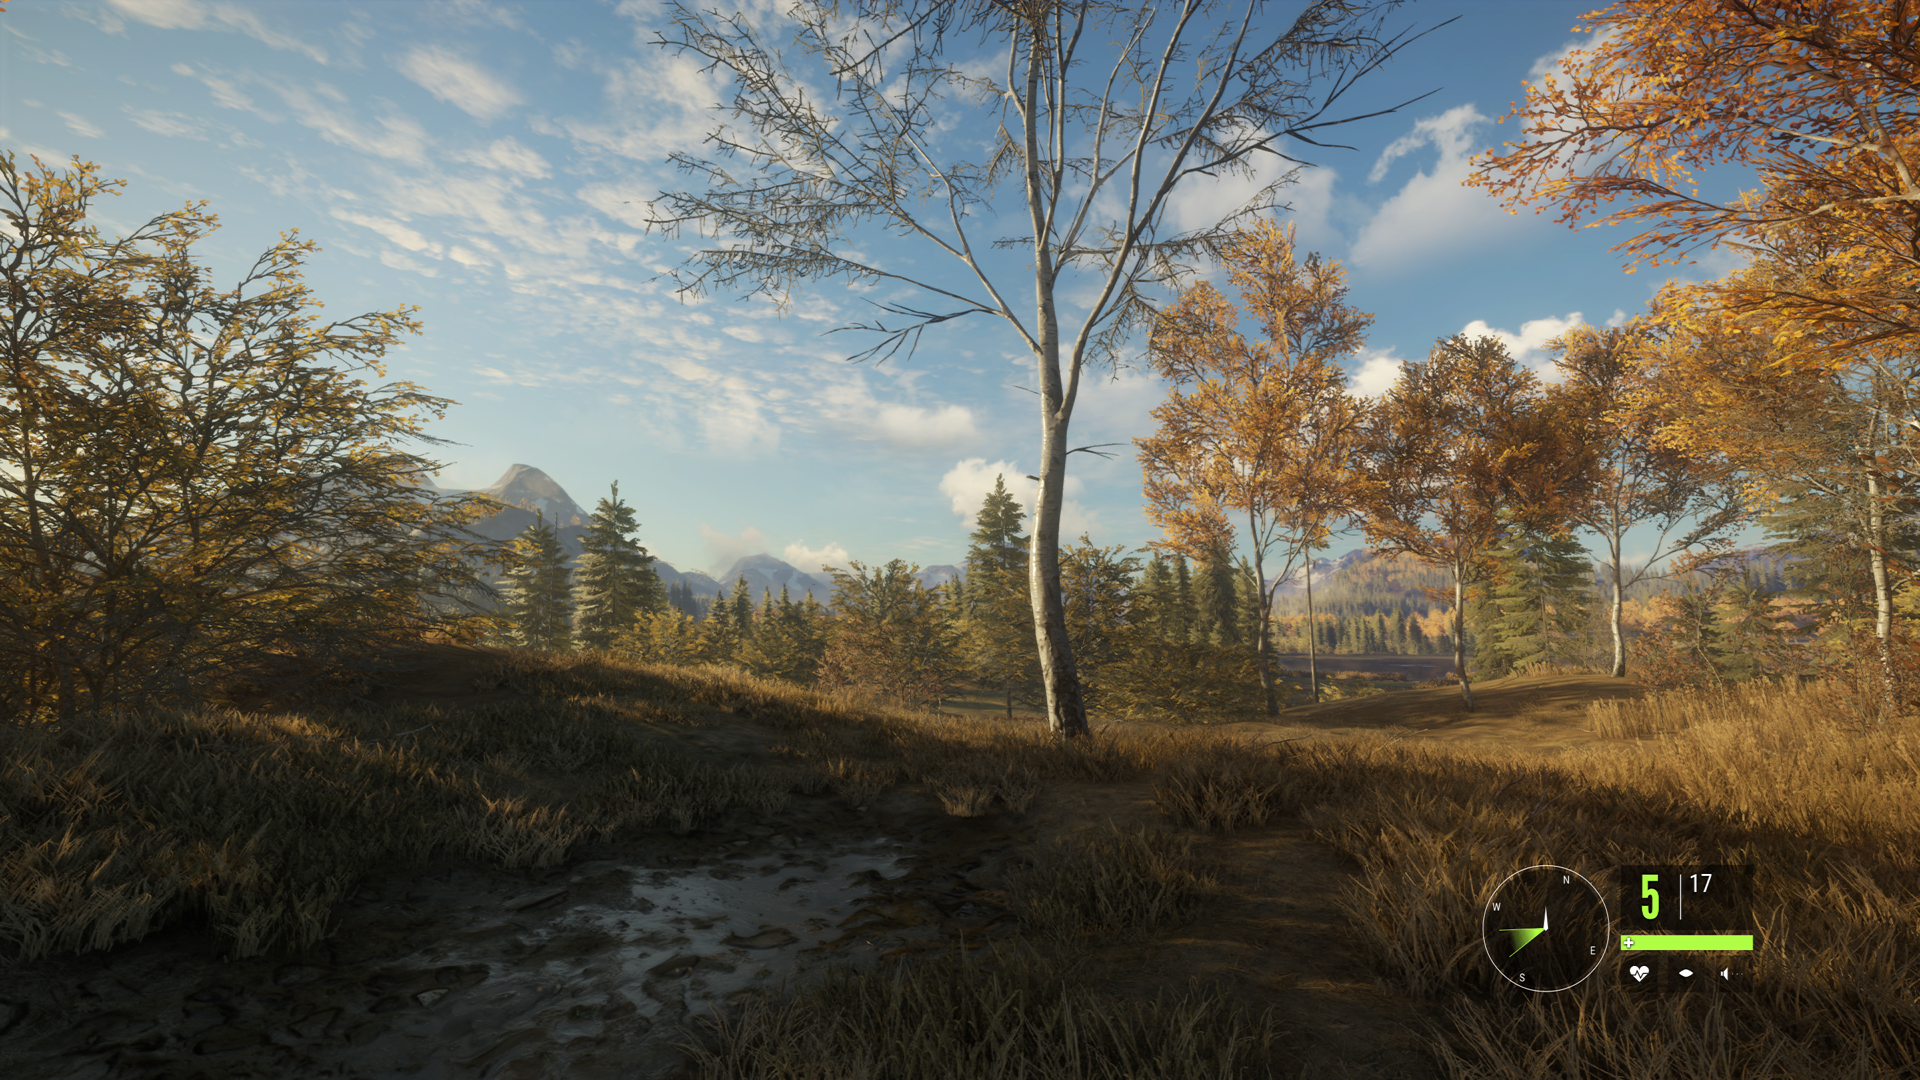 List of enhancements made to theHunter: Call of the Wild detailed (check comments)